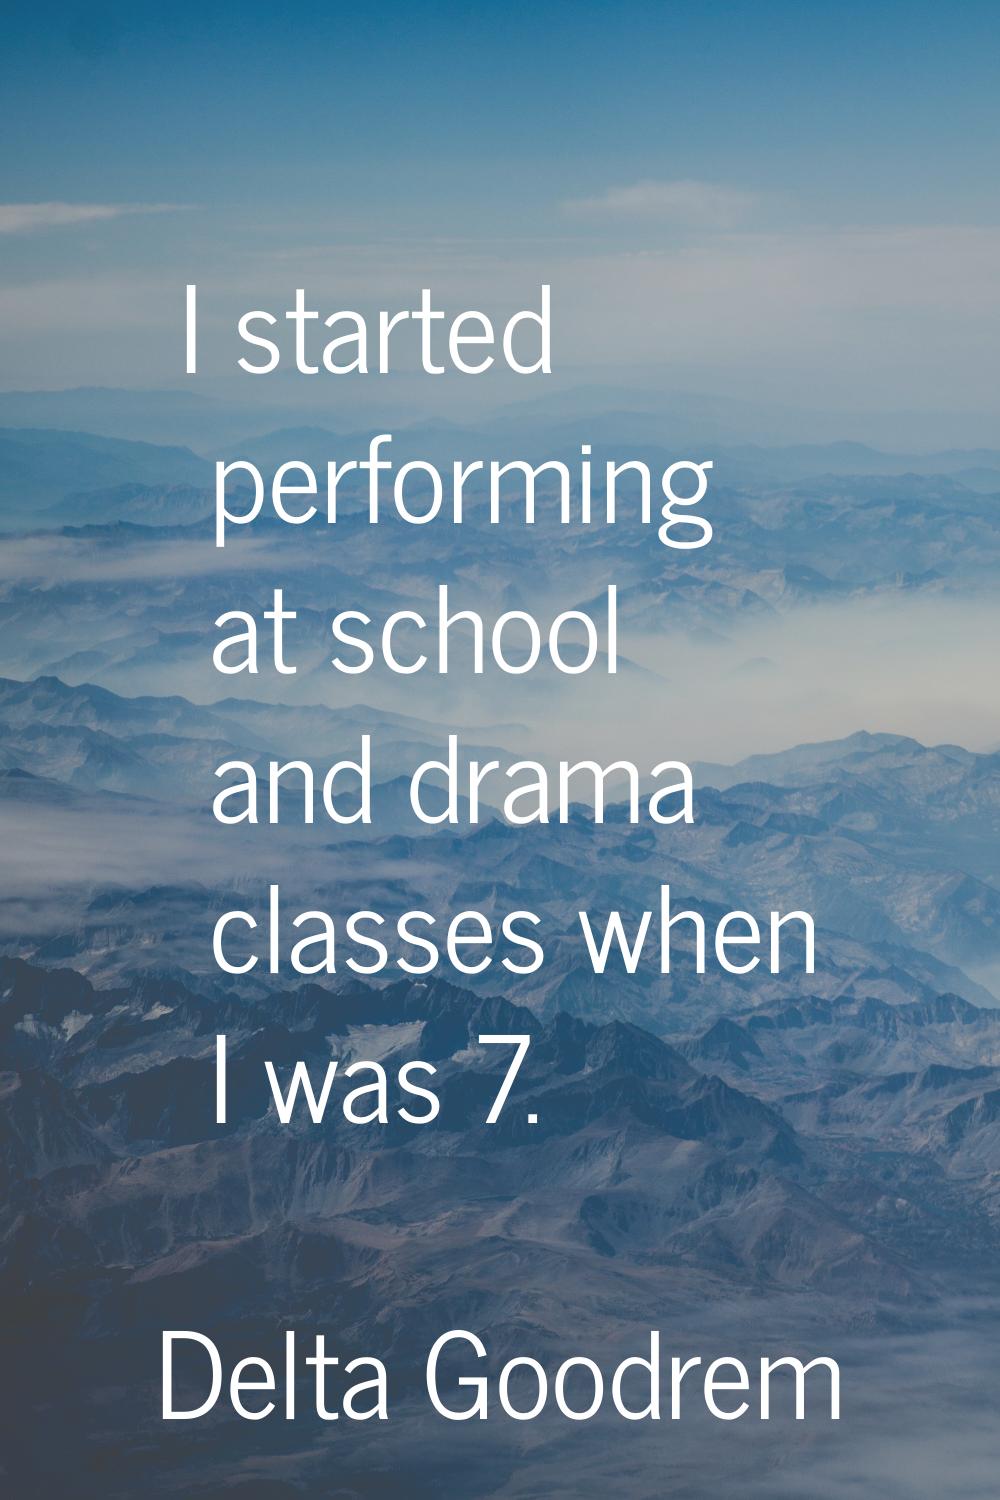 I started performing at school and drama classes when I was 7.